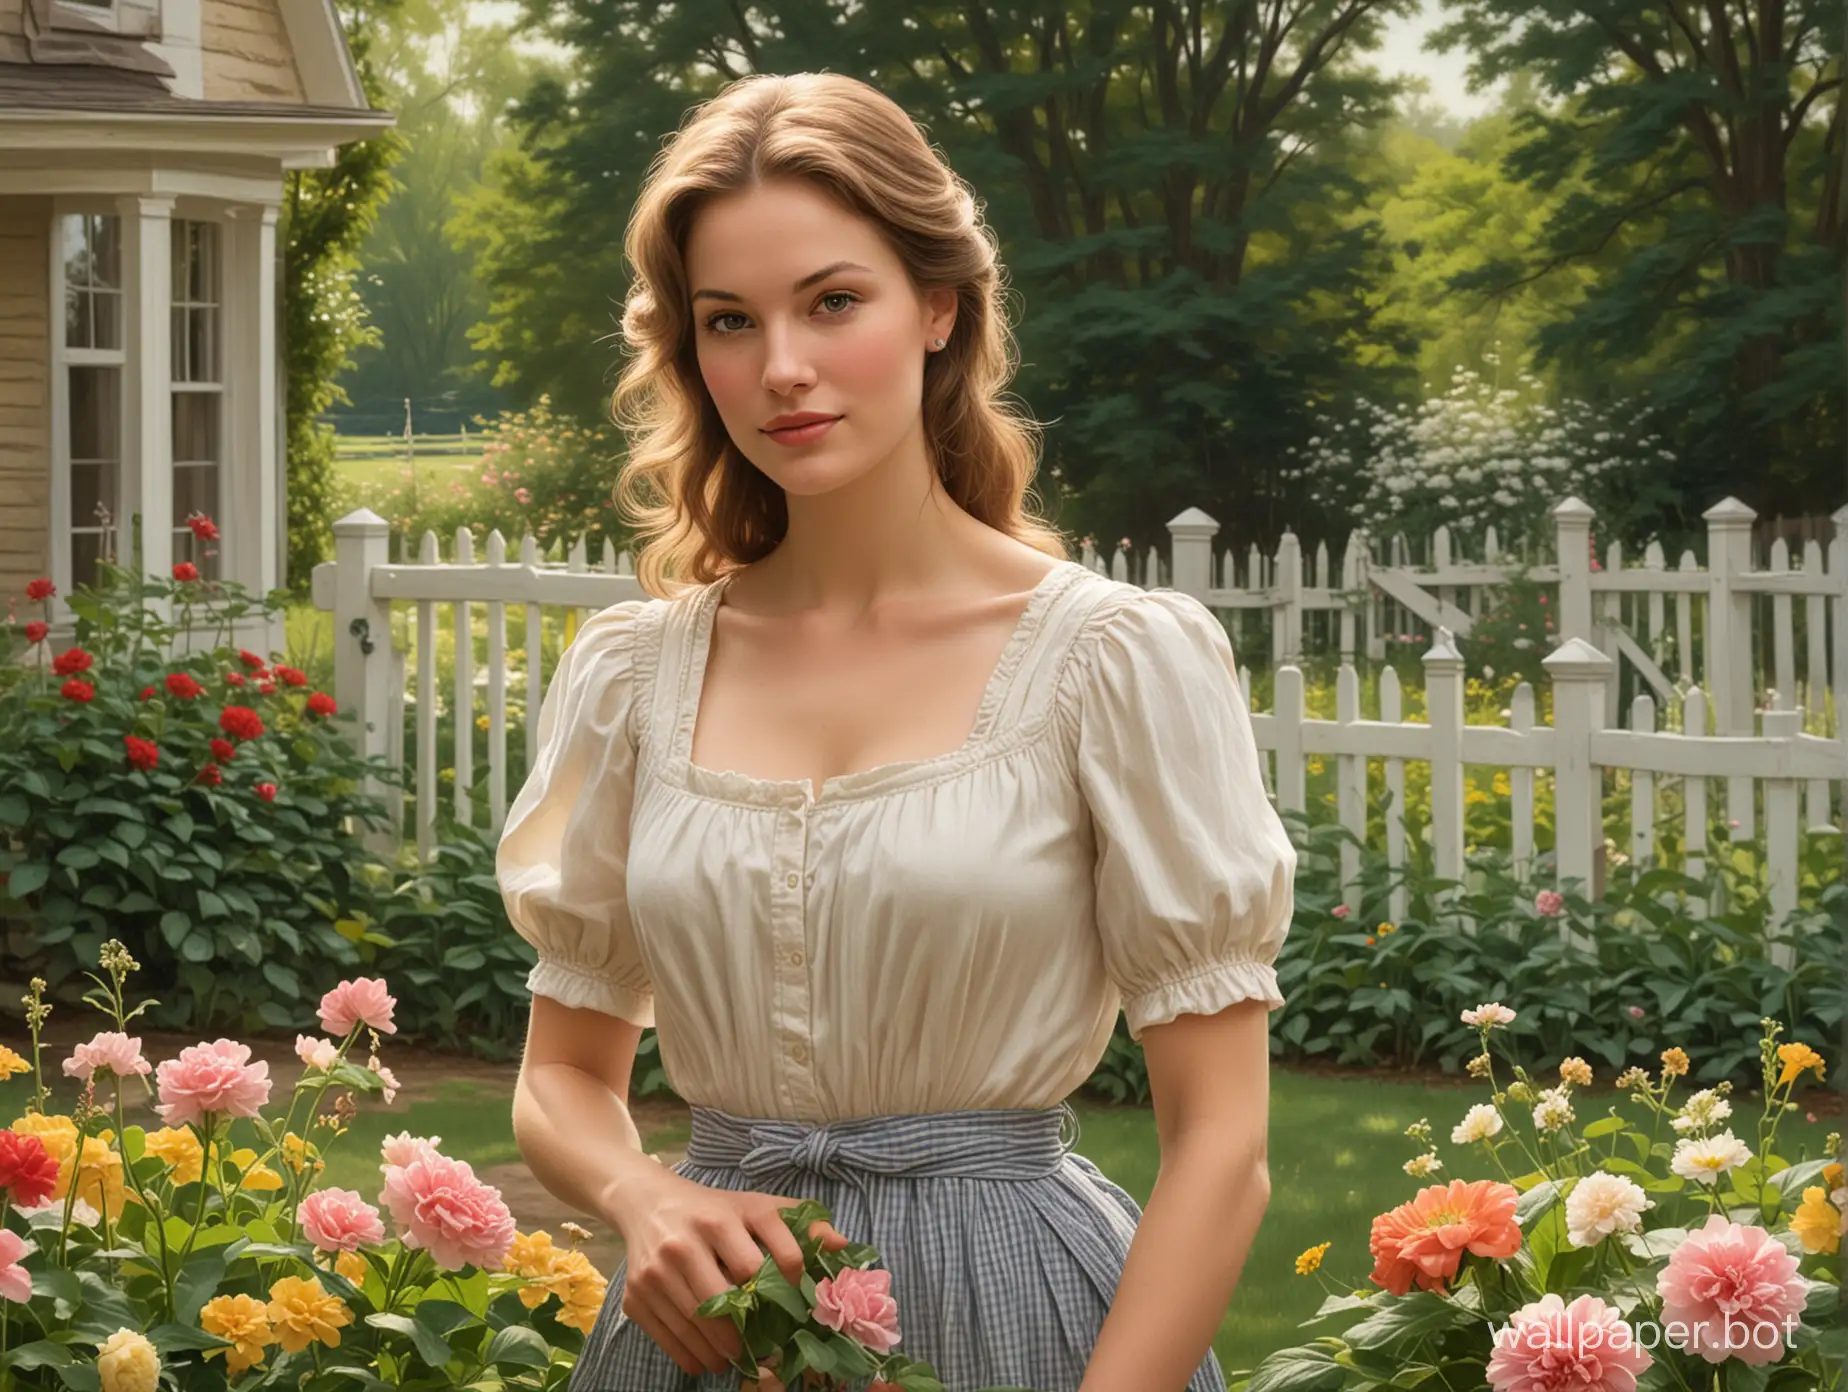 Captivating-American-Farm-Wife-Tending-Garden-and-Painting